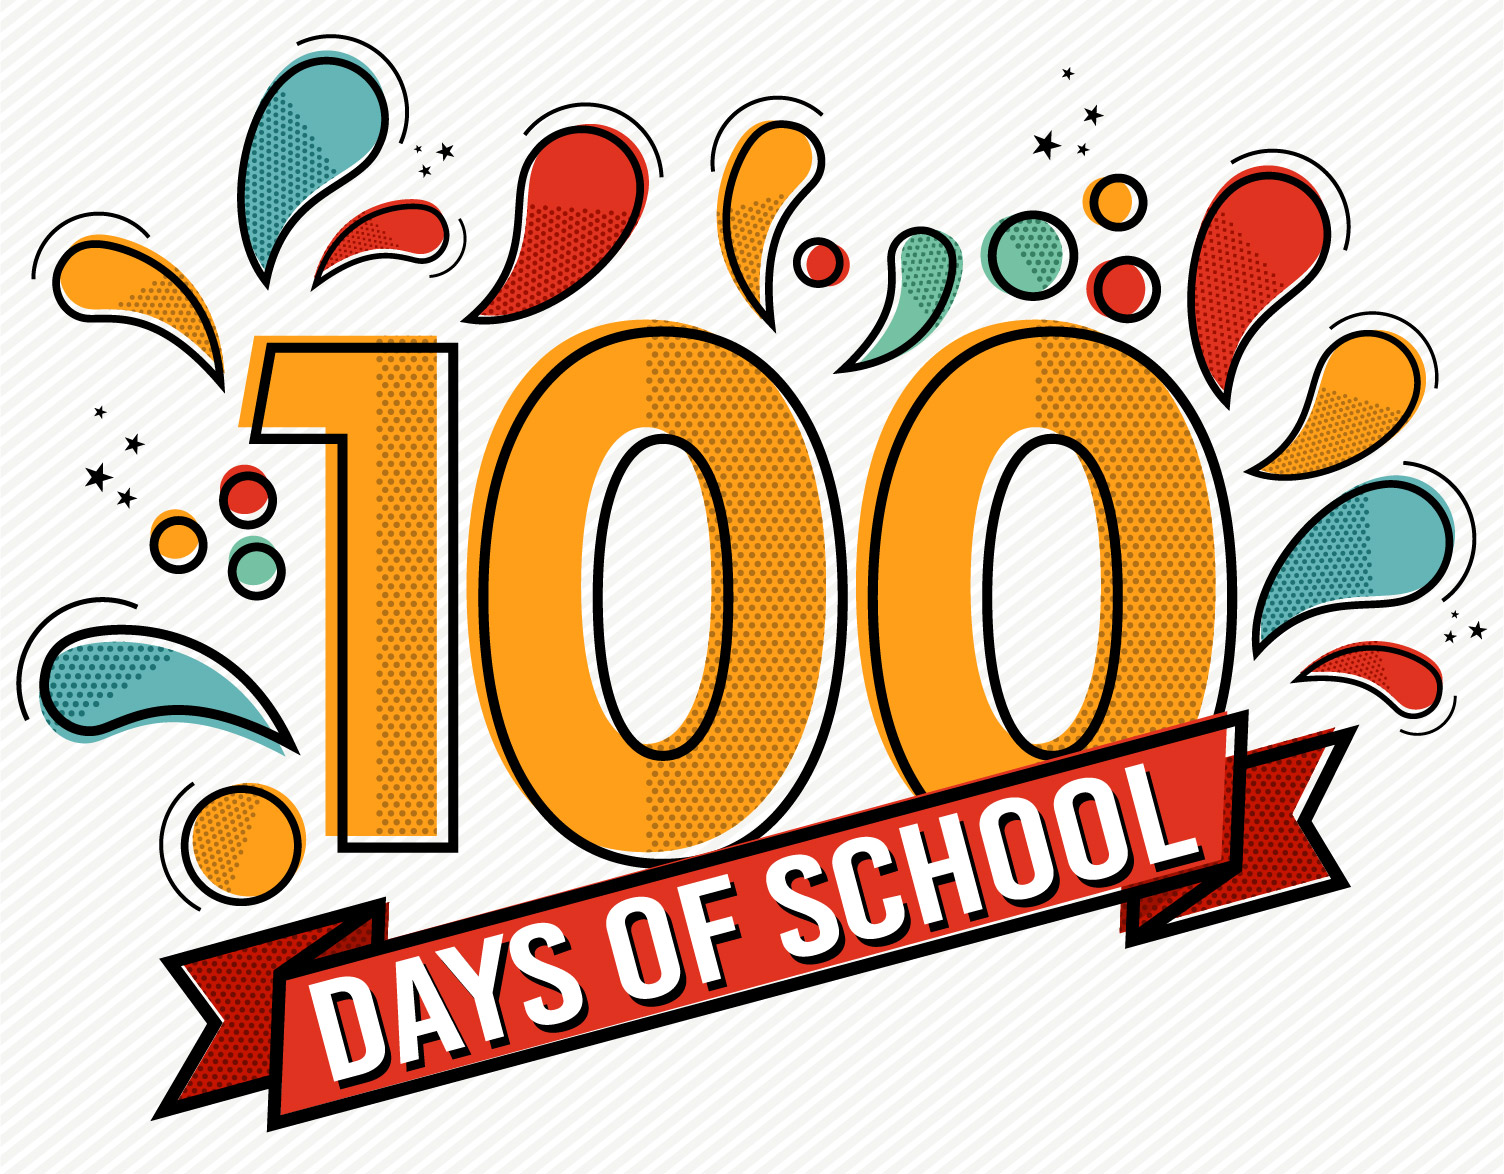 100th Day of School! | Trout Elementary